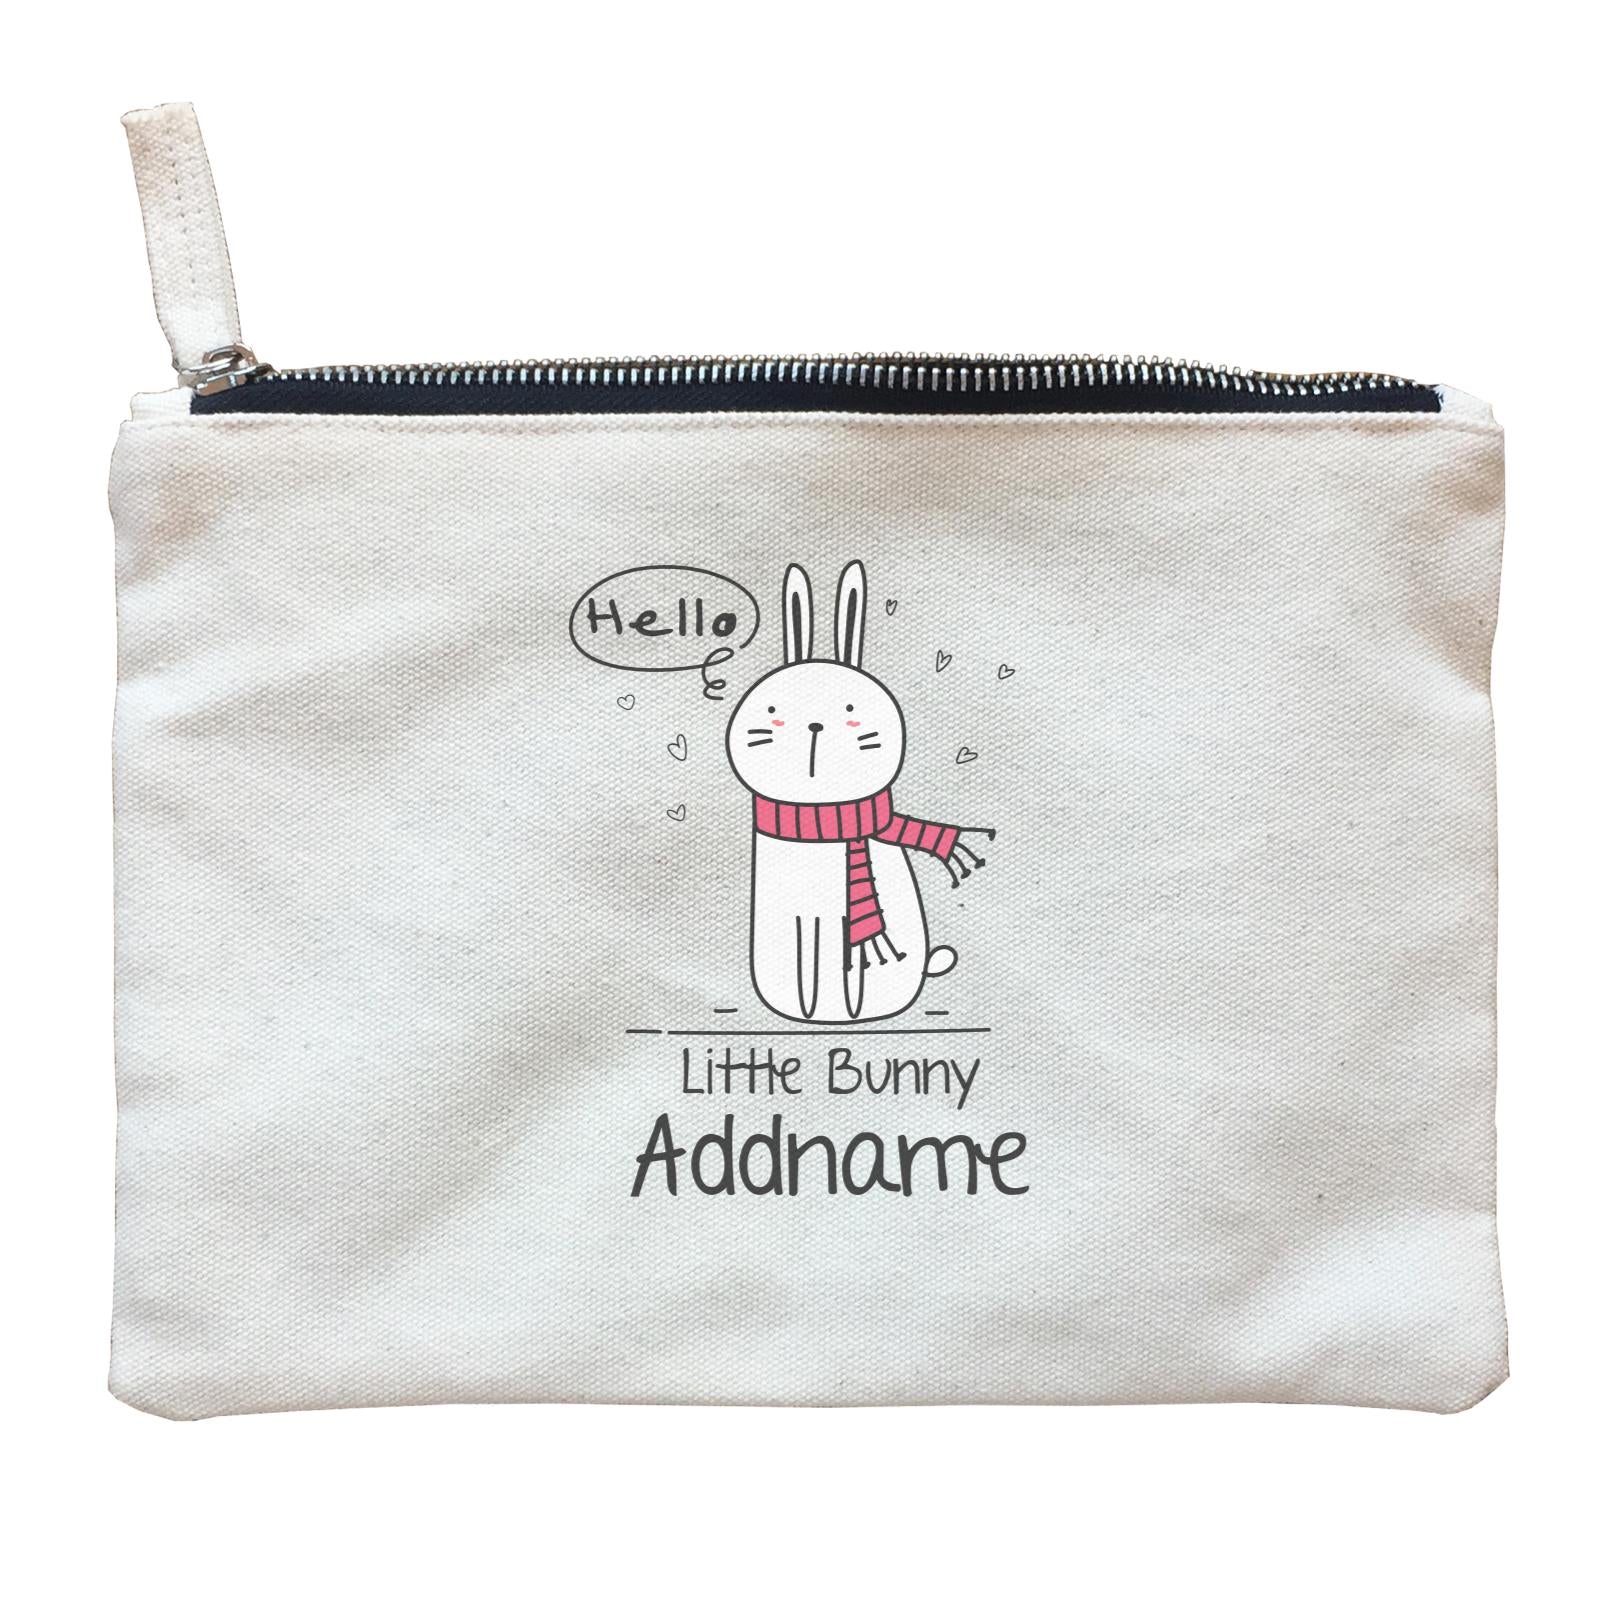 Cute Animals And Friends Series Hello Little Bunny Addname Zipper Pouch